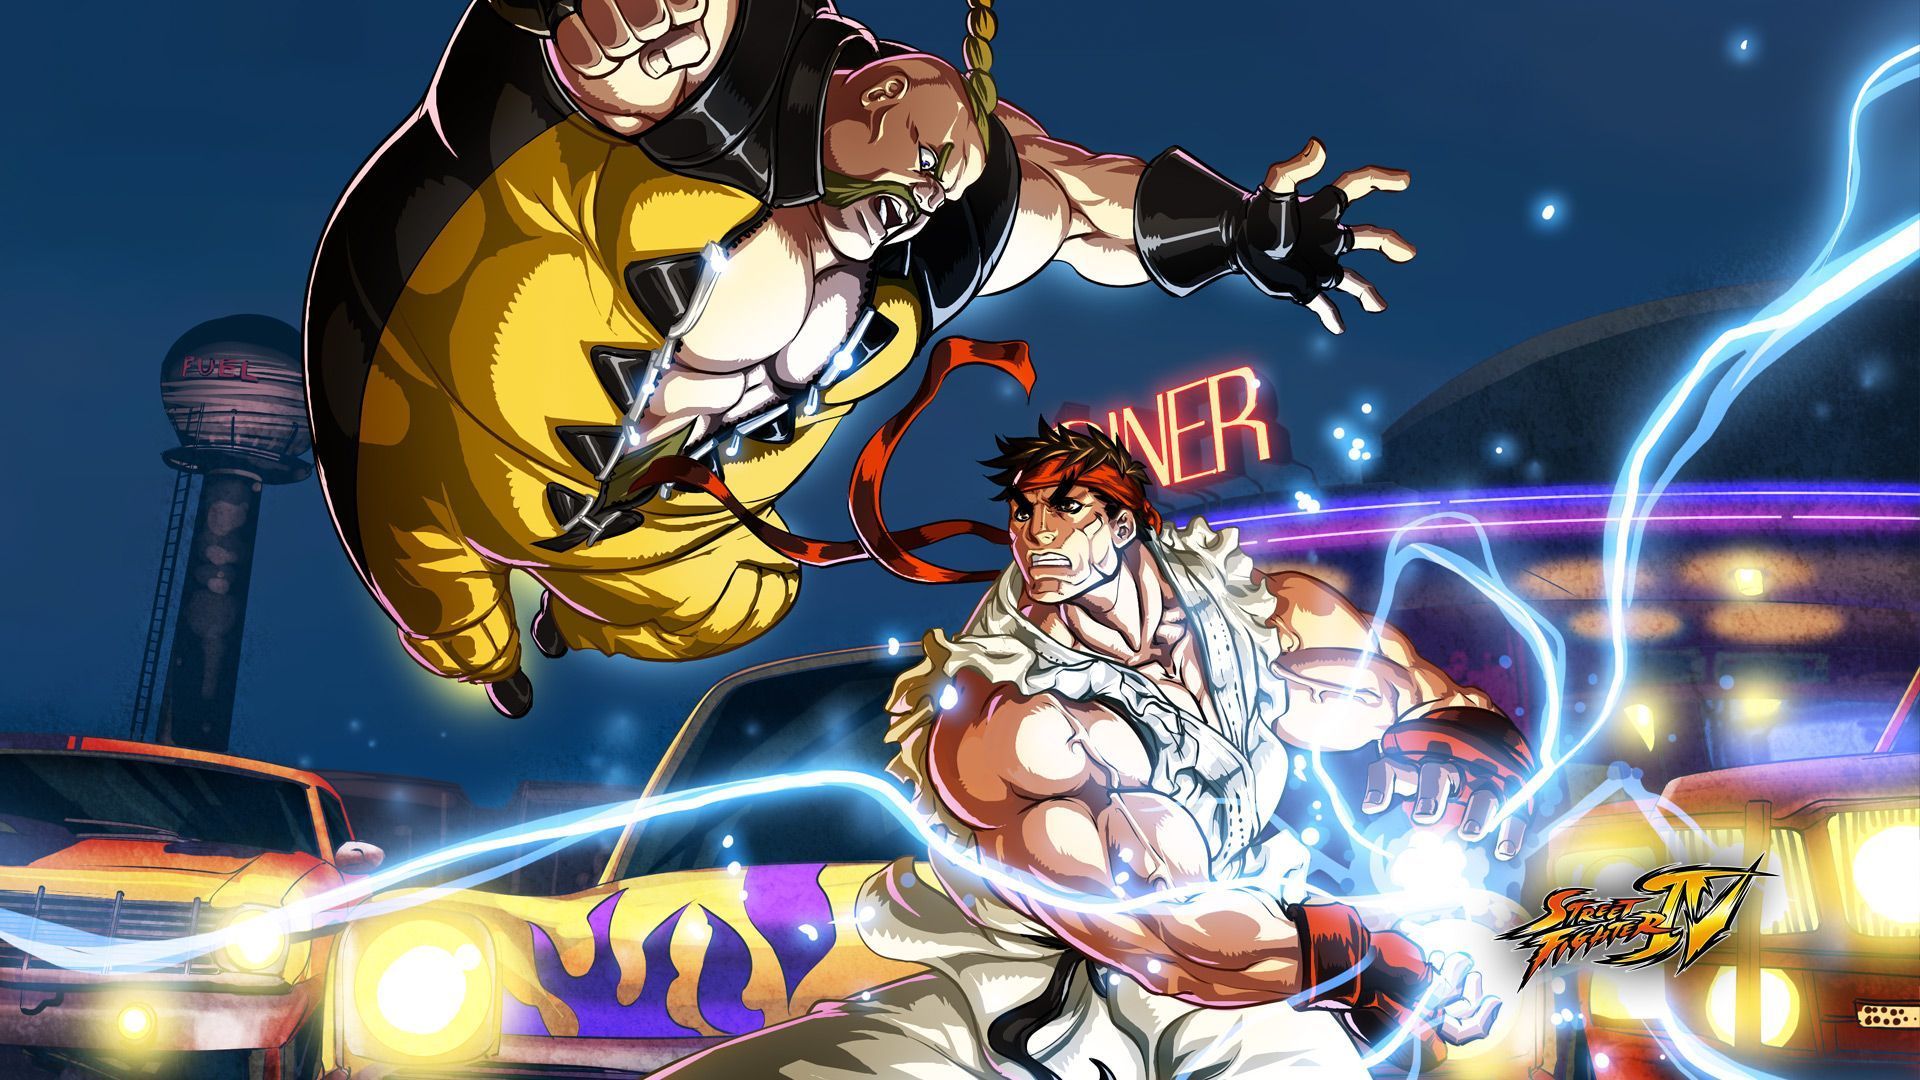 Street Fighter IV | Free Desktop Wallpapers for HD, Widescreen and ...